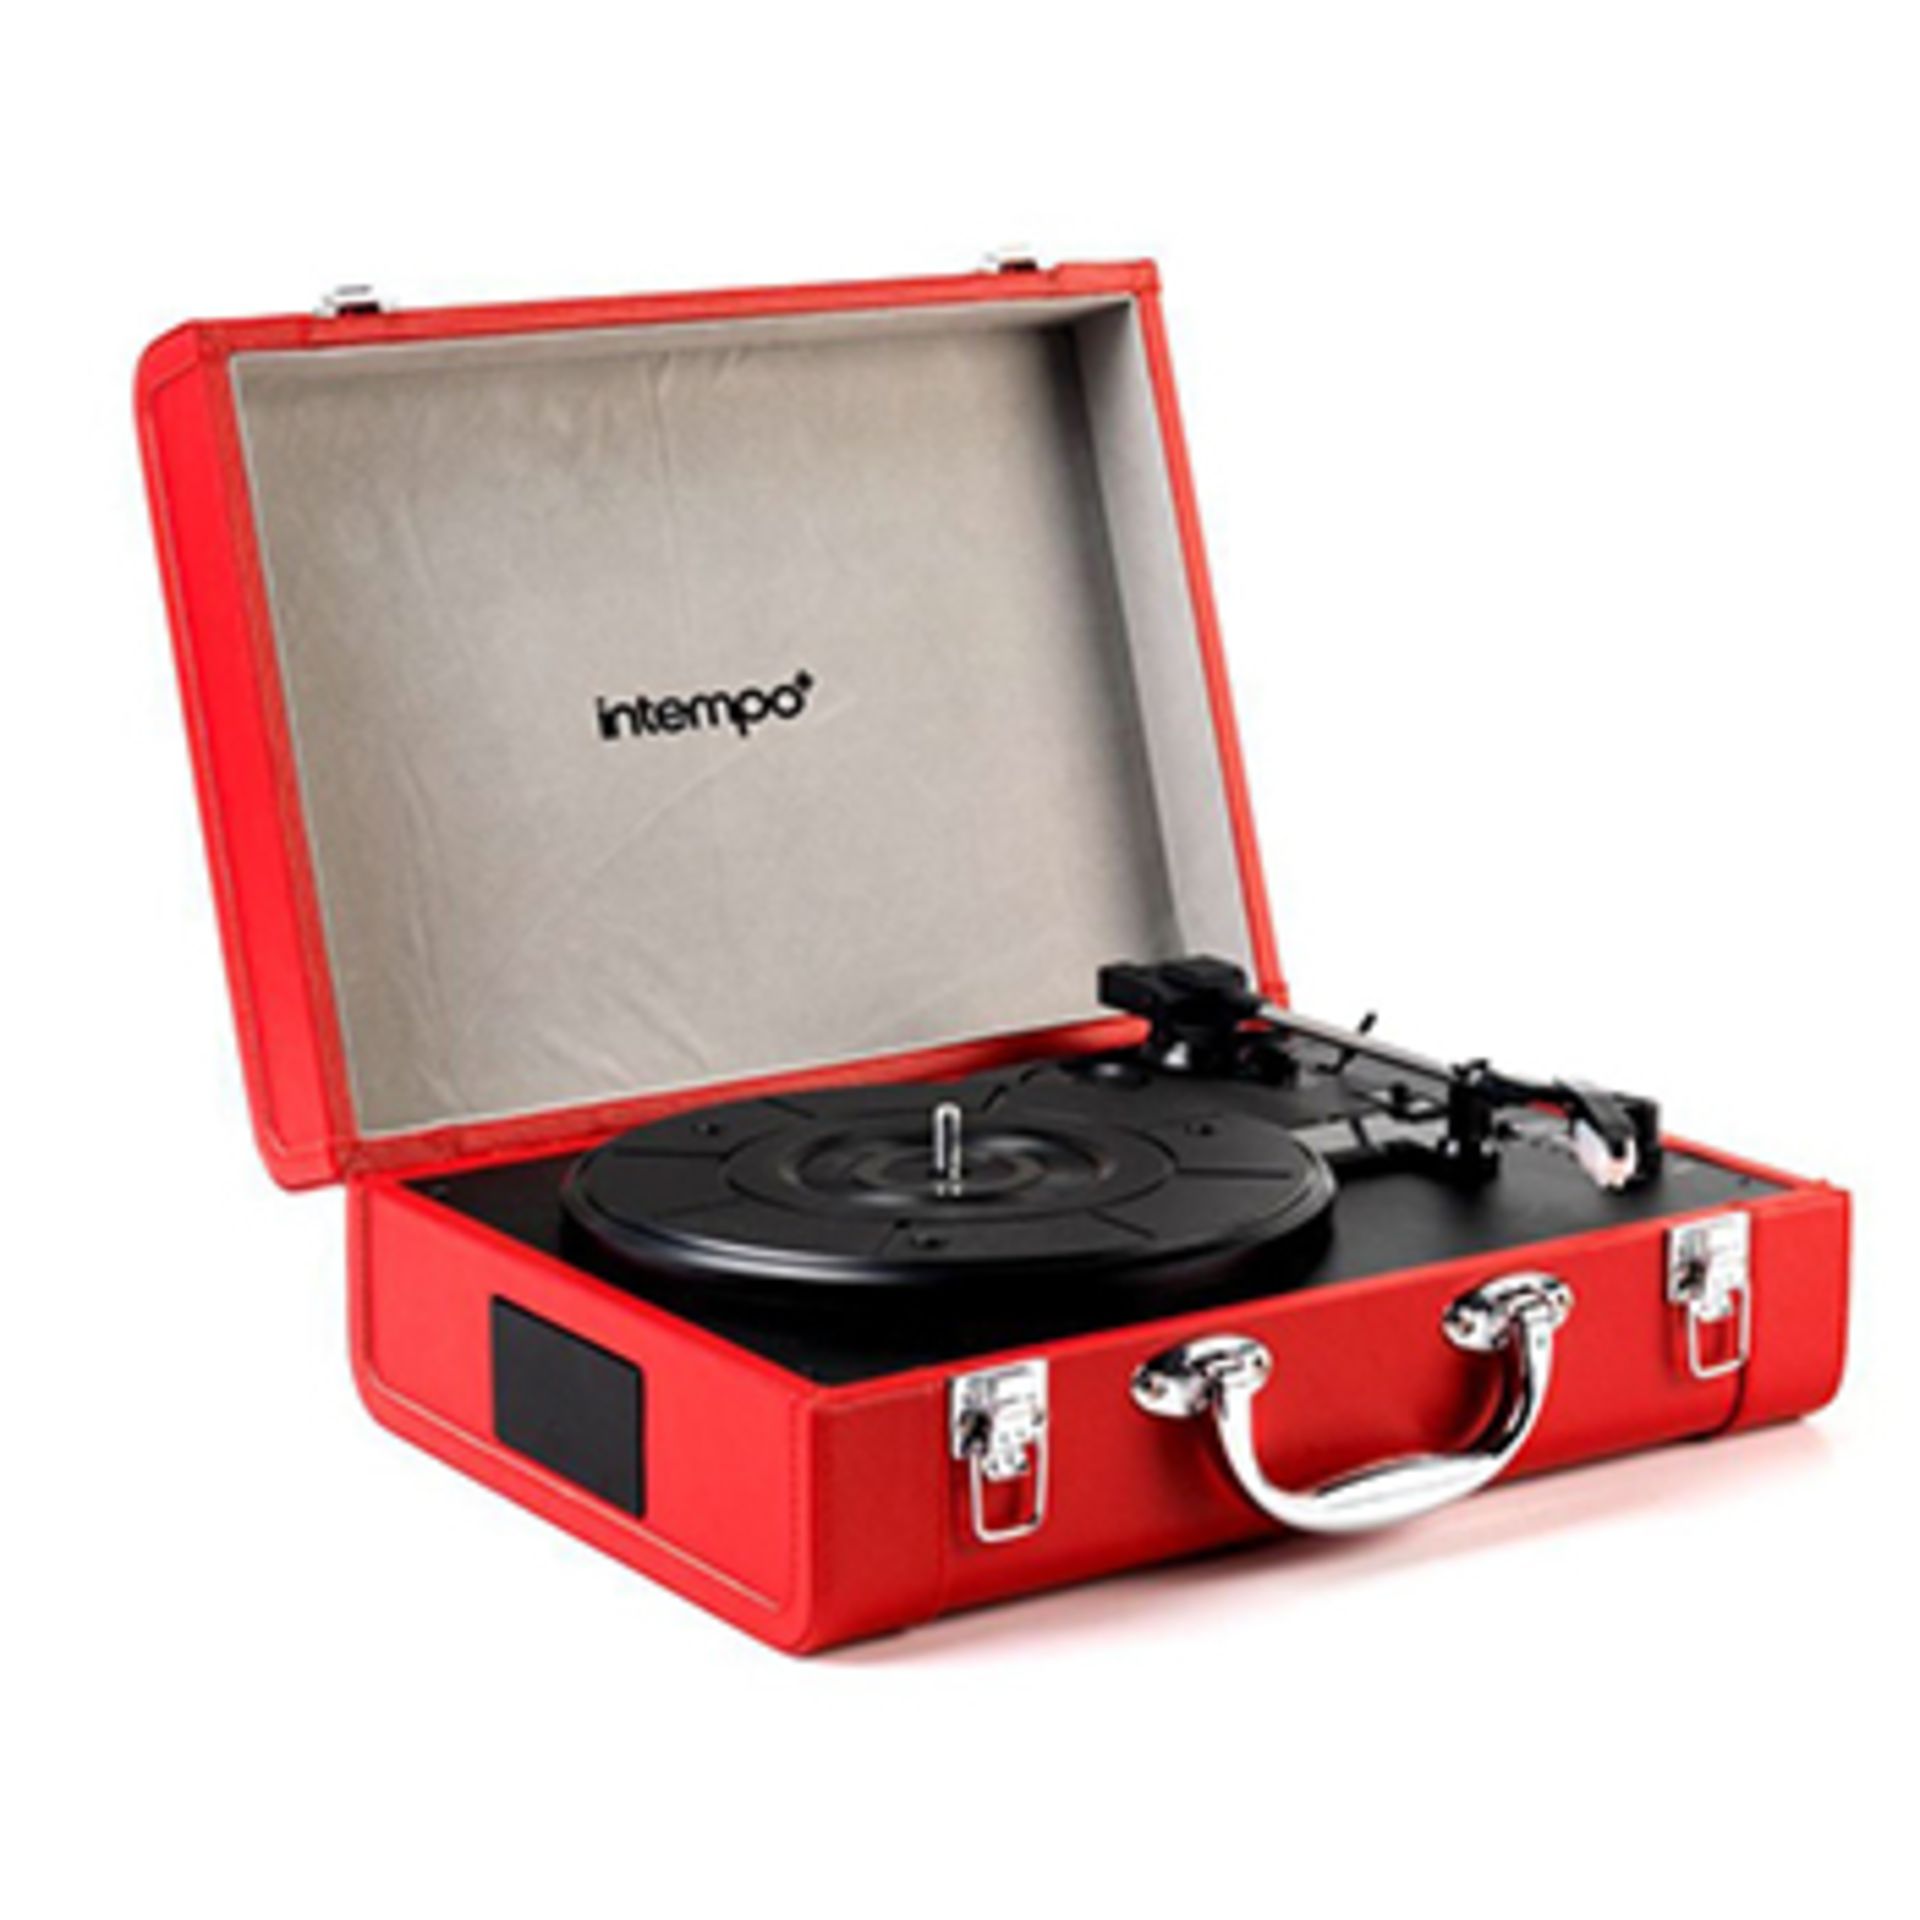 V Brand New Valise Audio Bluetooth Turntable With 2 Speakers And 3 Speeds - RRP: £99.99 X 2 YOUR BID